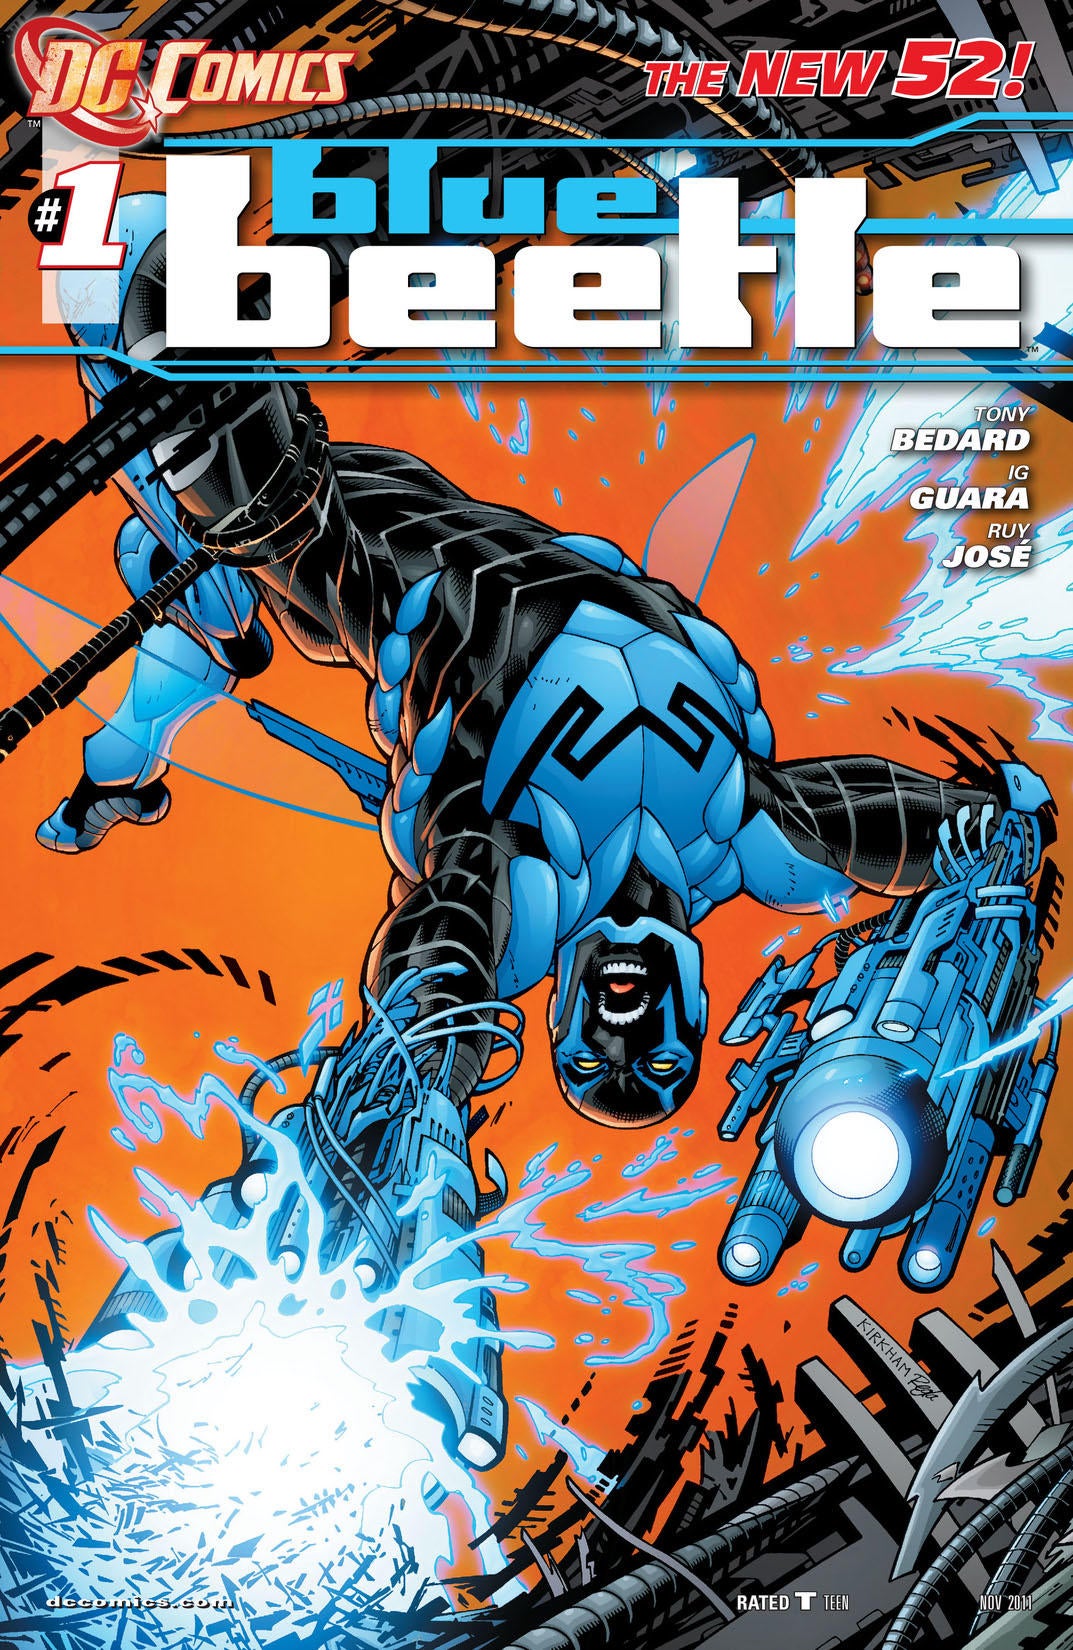 Blue Beetle trailer: a first look at DC's newest superhero movie - The Verge